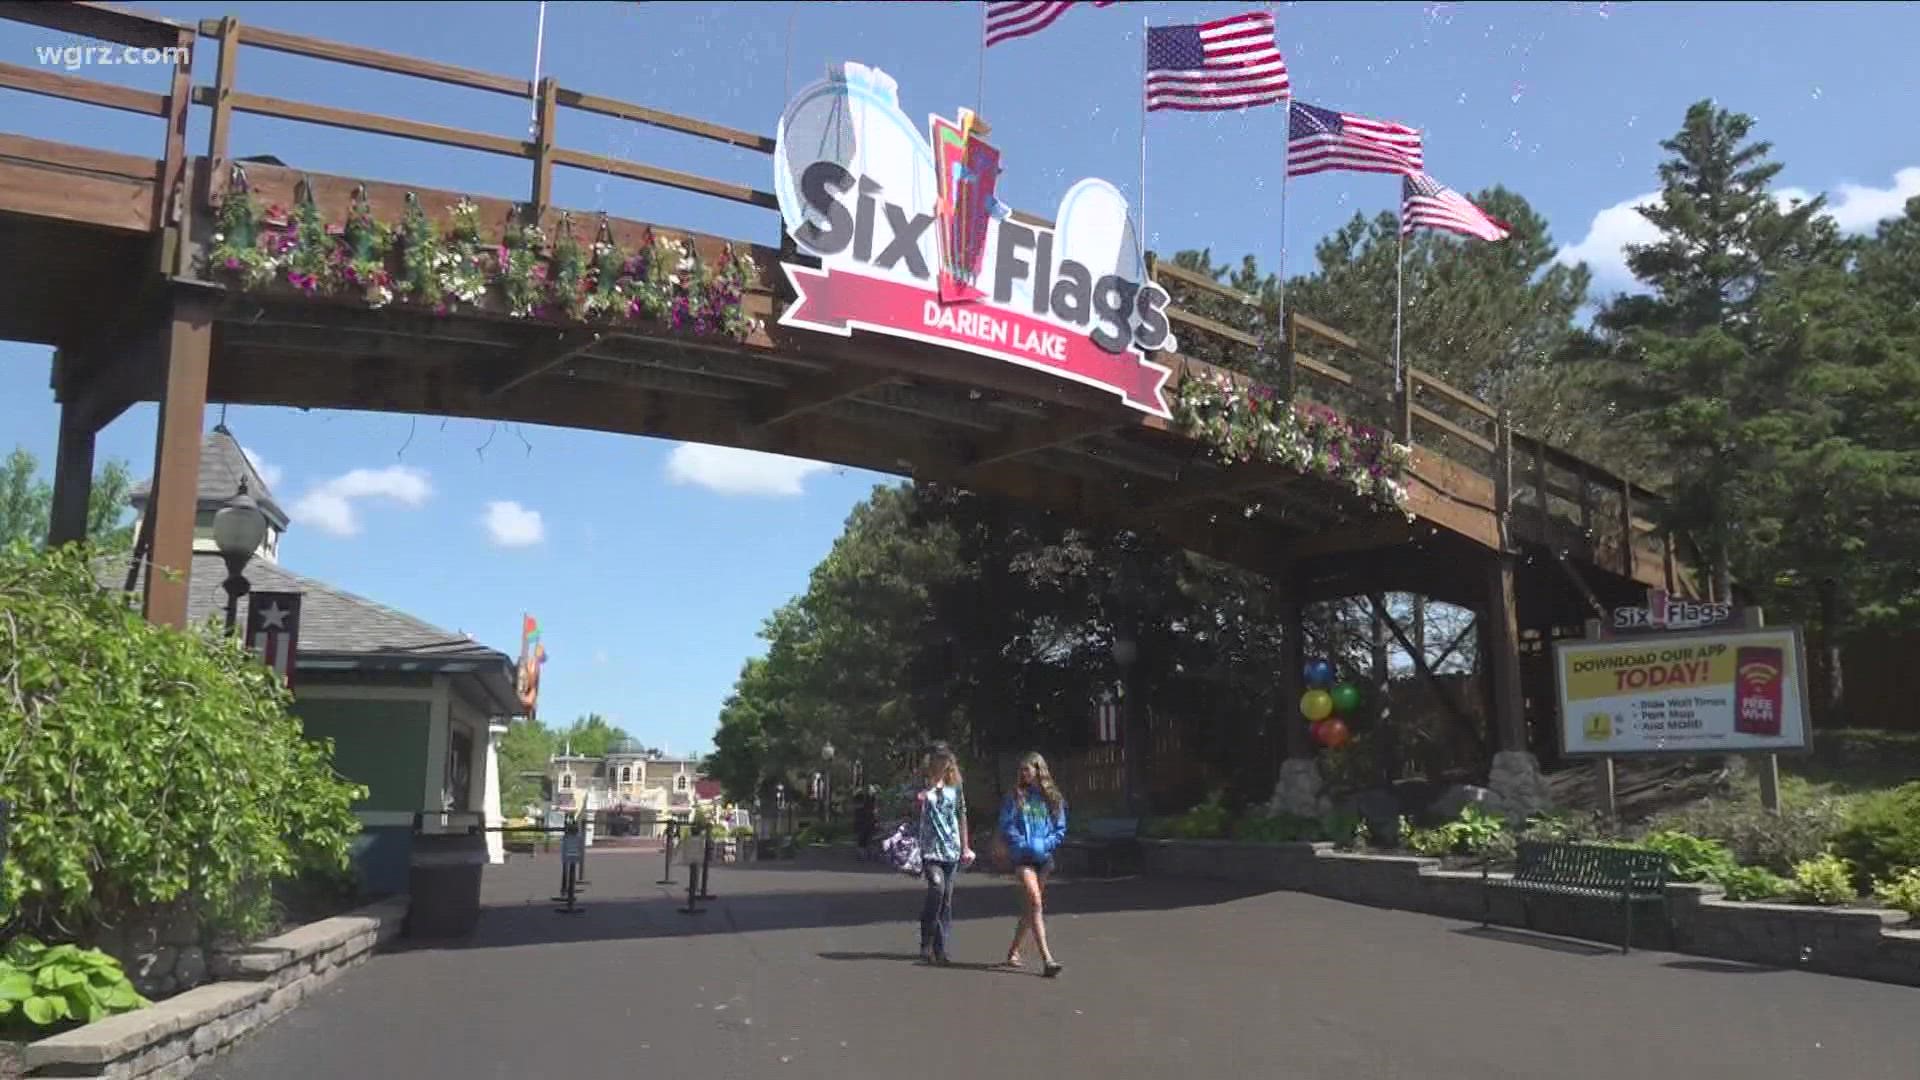 Six Flags Darien Lake is open for the summer season with some new attractions and improvements.